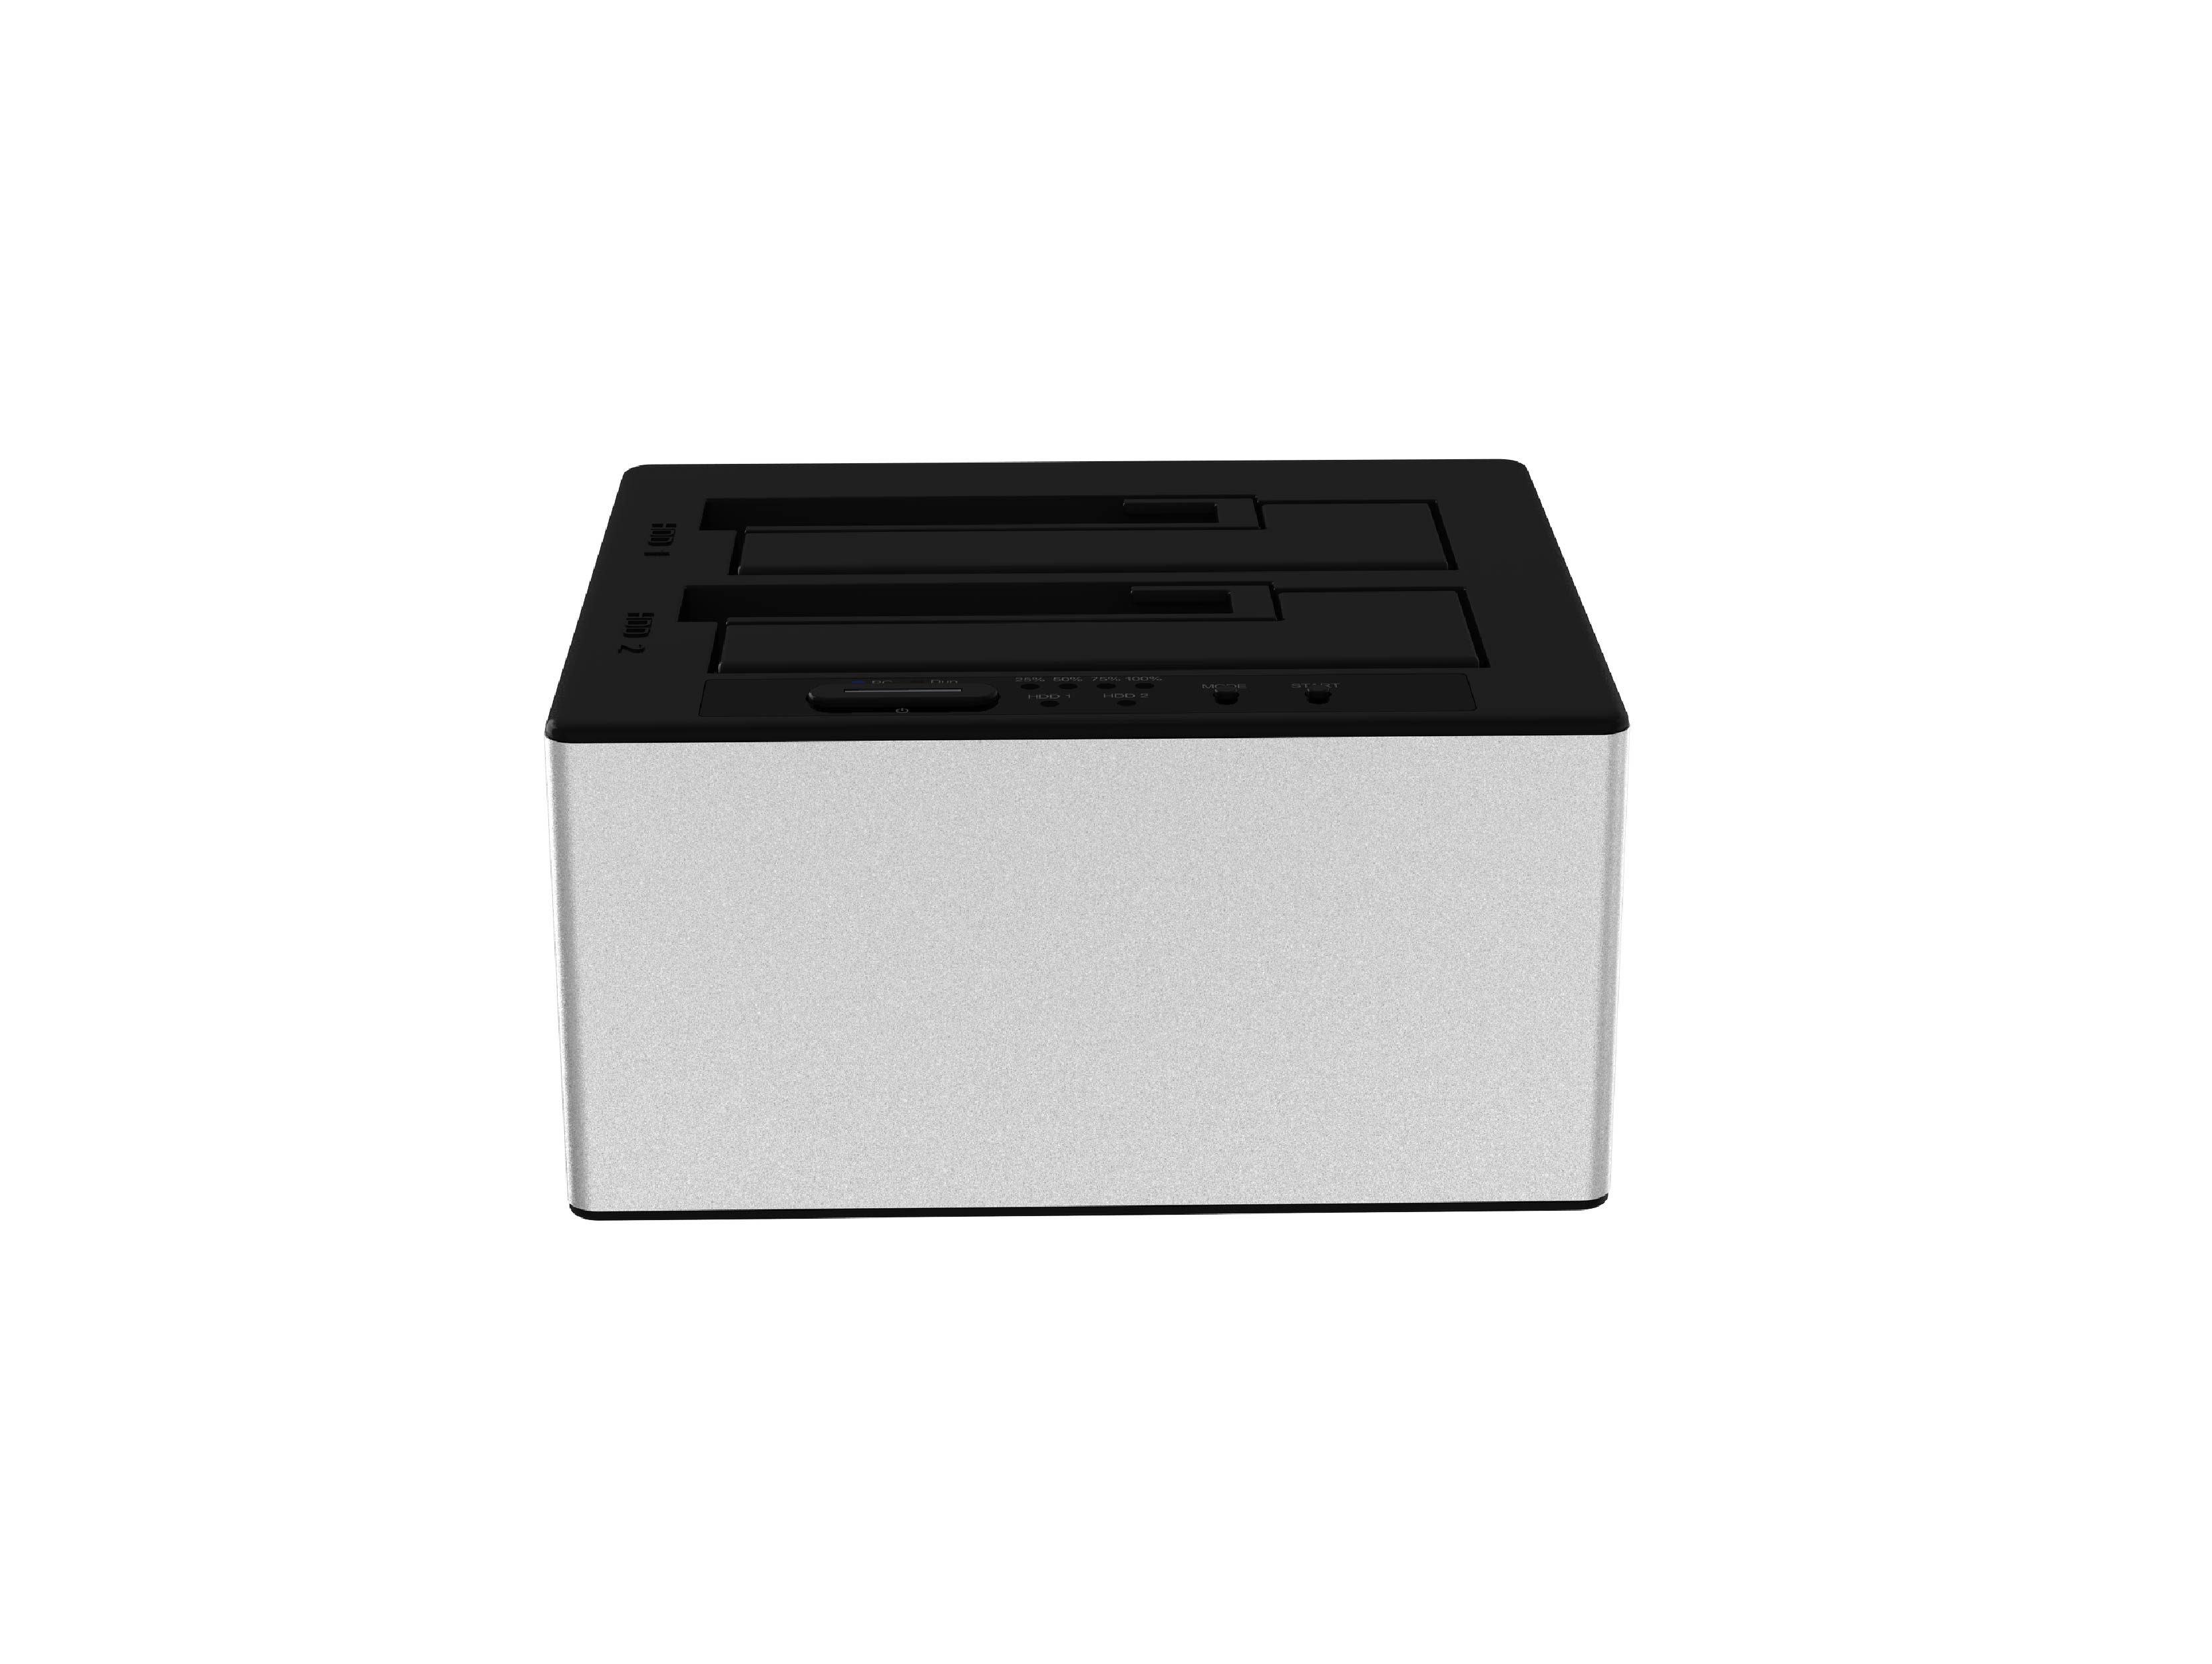 2 Bay SATA SSD/HDD Duplicator (SI-7925US31C-D), applicable 2x 3.5" or 2.5" SATA HDD/SSD, support PC Mode & Clone mode switchable, USB-C 10Gbps to host.